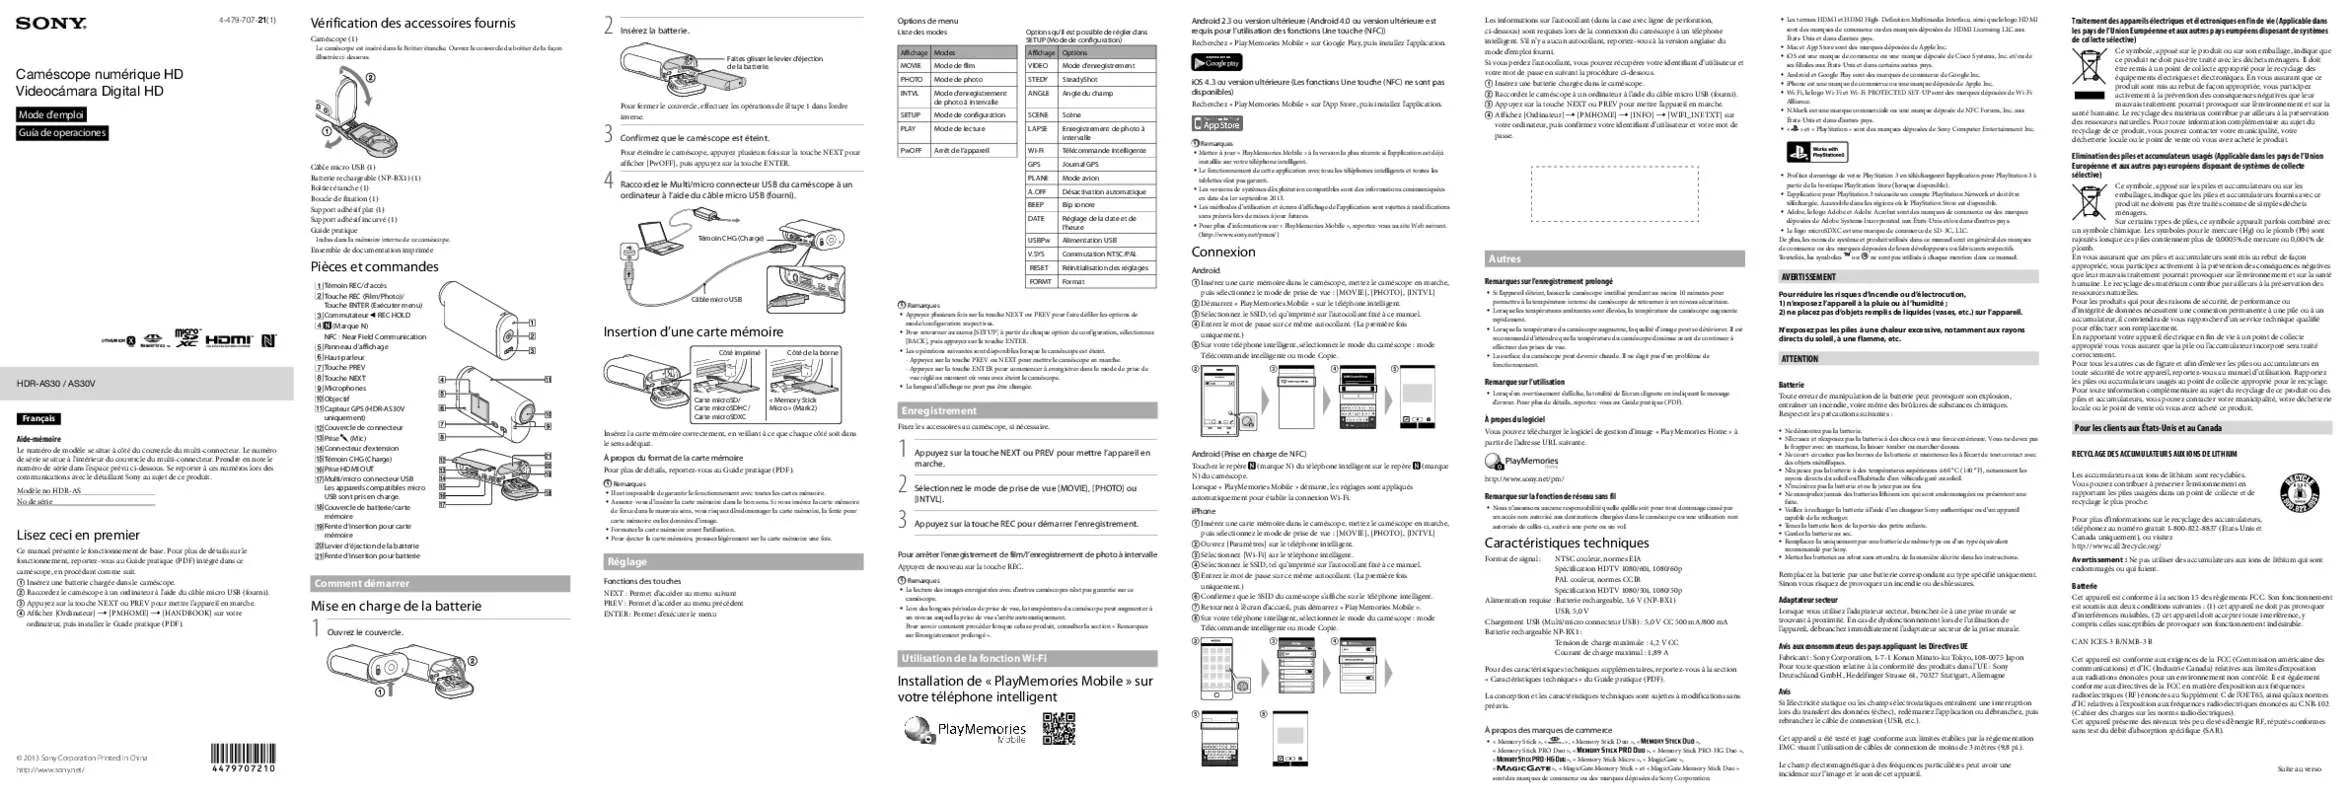 Mode d'emploi SONY HDR-AS30